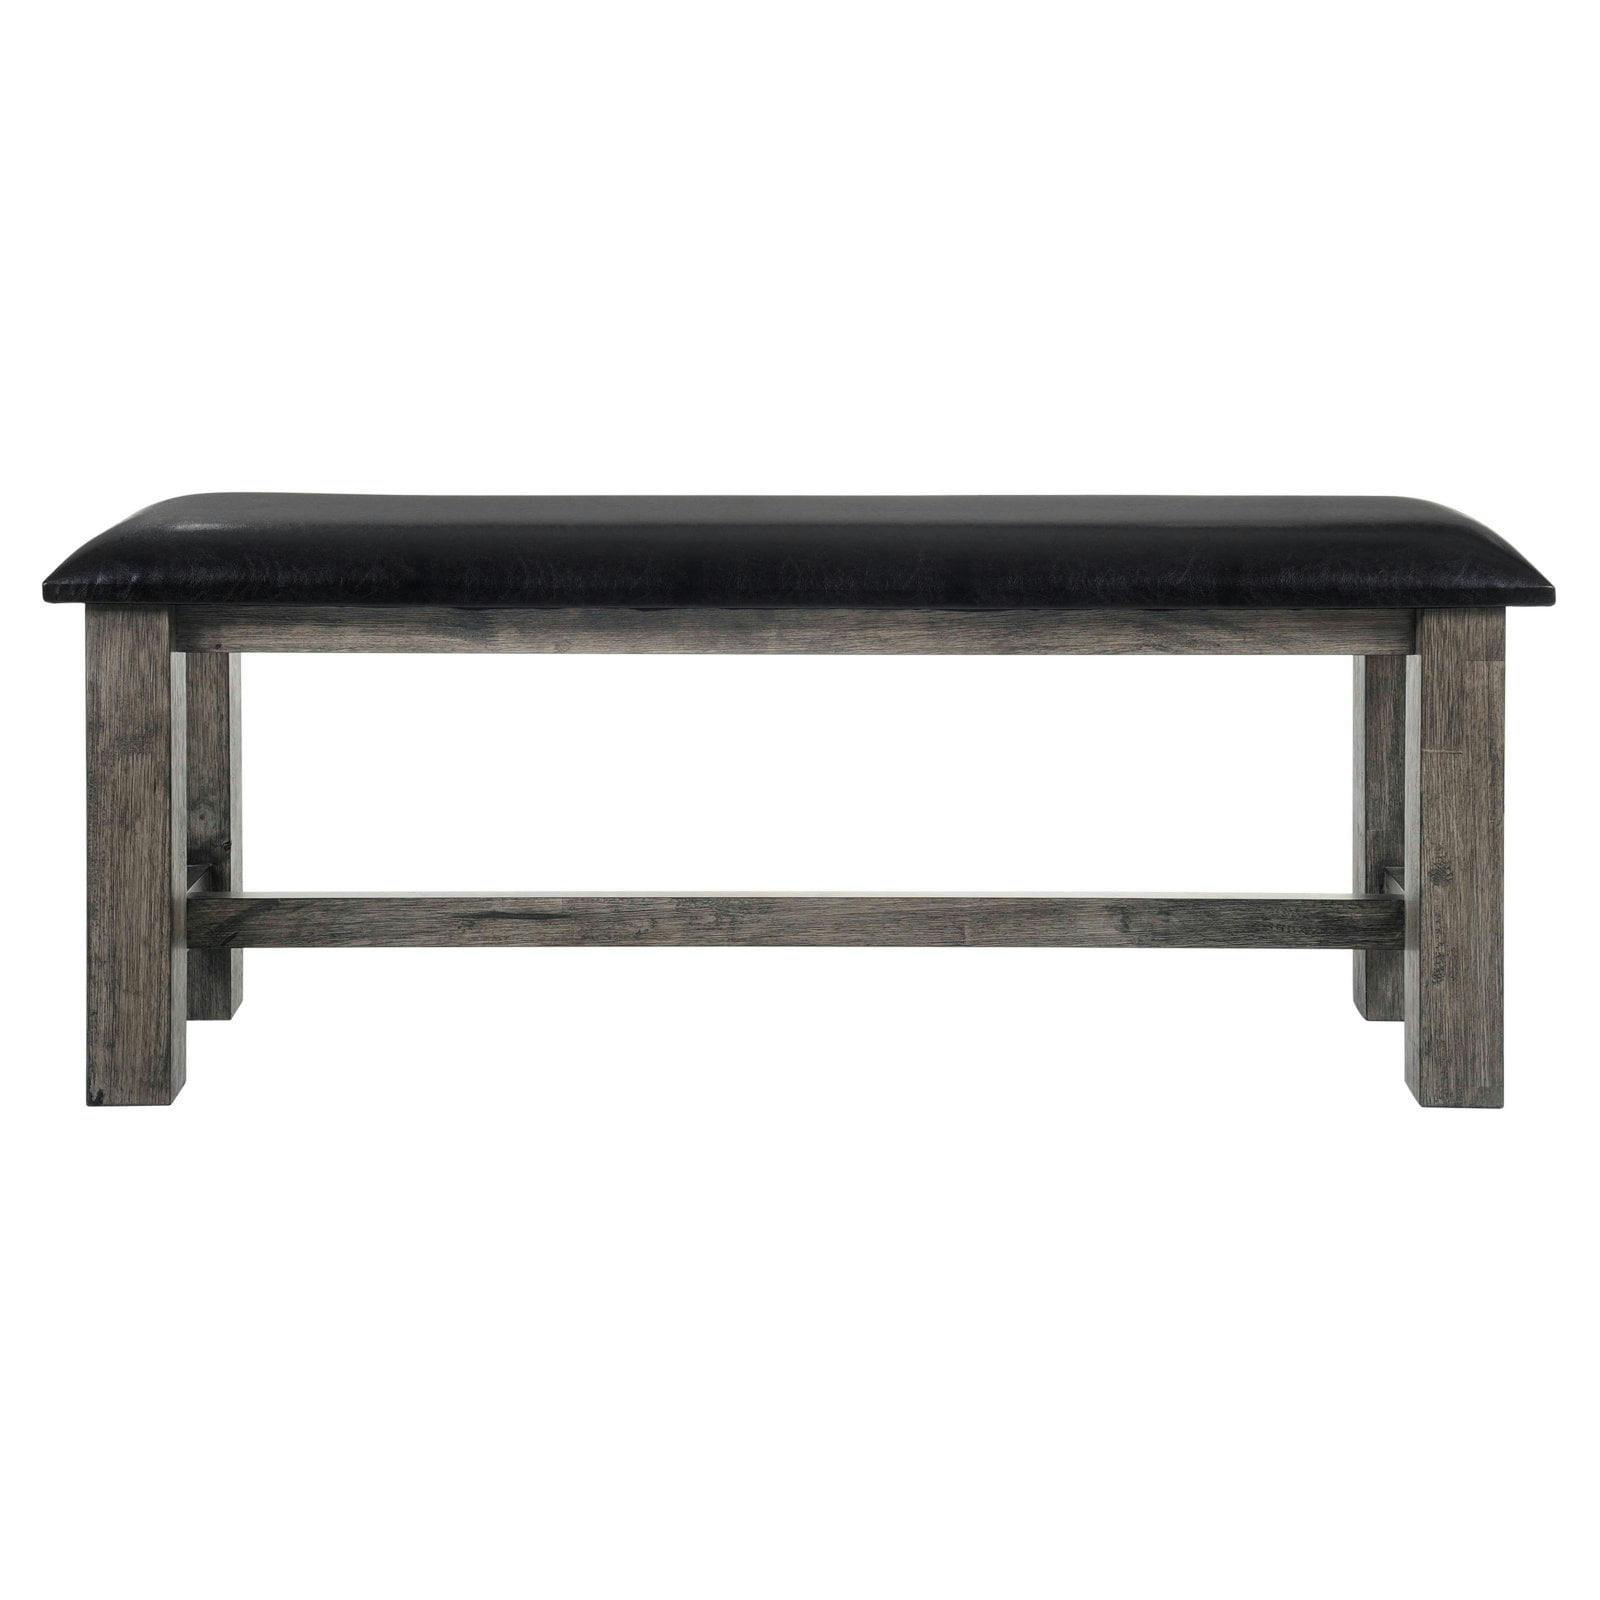 Grayson Rustic 47" Black Faux Leather Upholstered Dining Bench